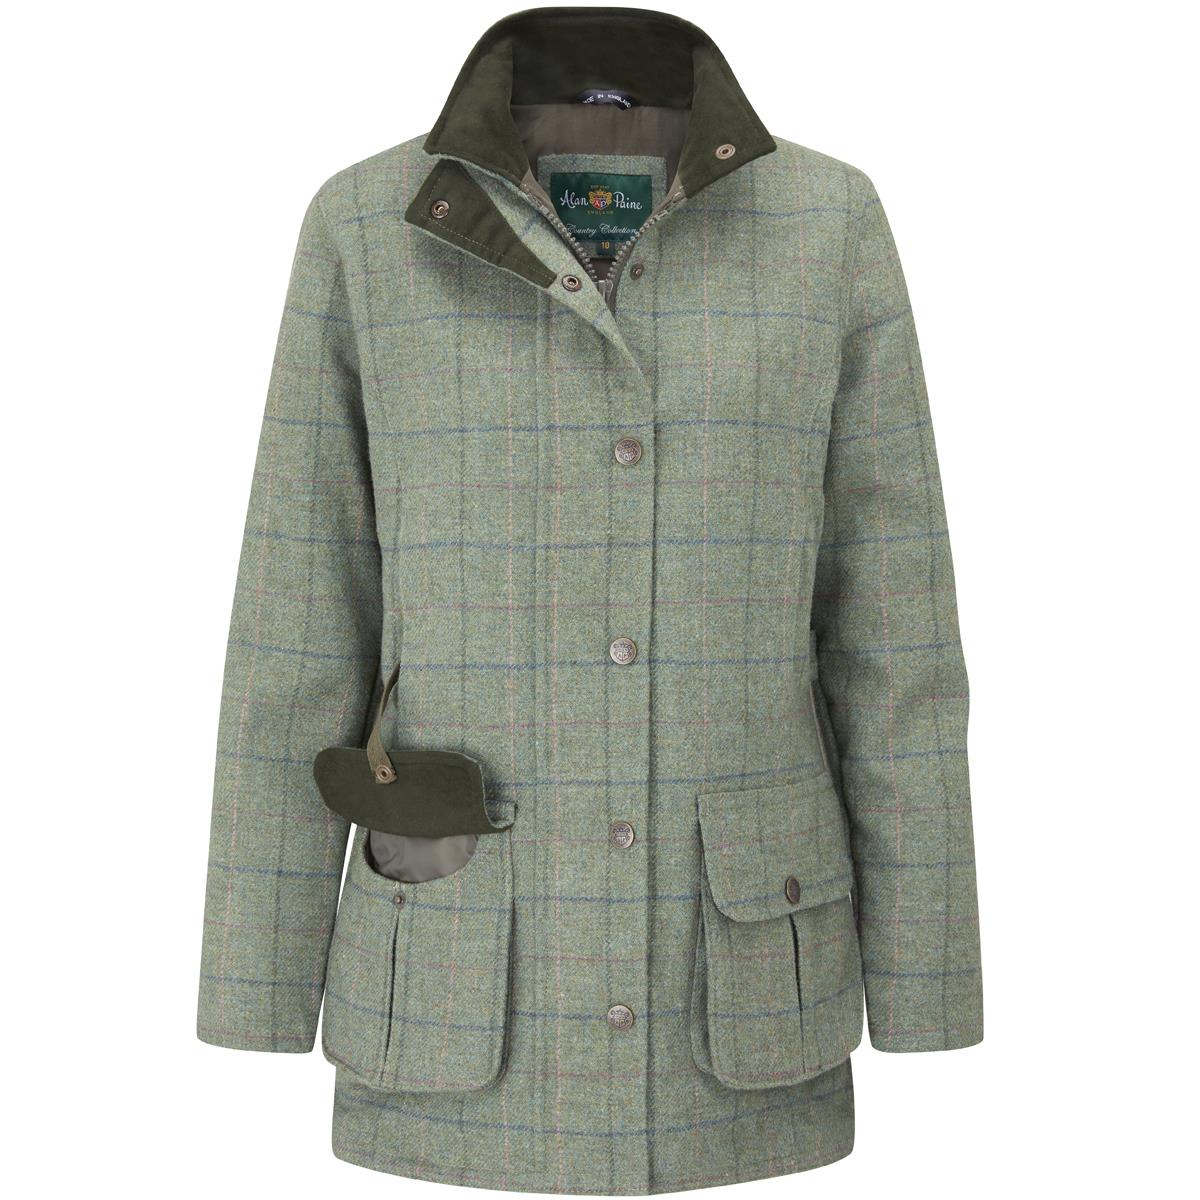 Could you please provide the cleaning guidelines for the Alan Paine Ladies Rutland Coat?